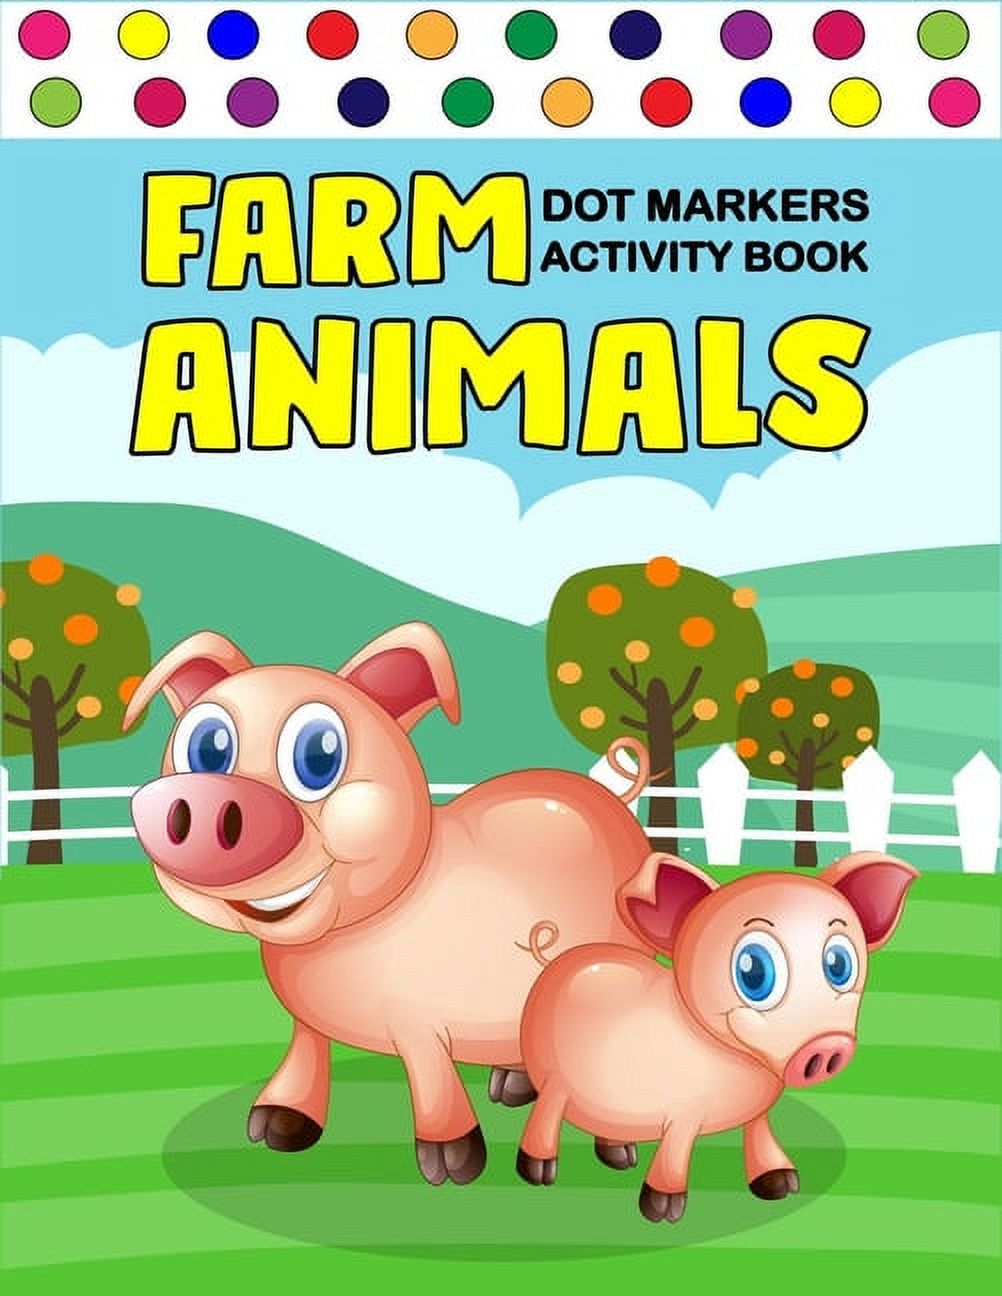 Farm Animals Dot Markers Activity Book : Art Paint Daubers Kids Activity  Coloring Book / Gift For Kids Ages 1-3, 2-4, 3-5, Baby, Toddler,   (Little ladies and little genltemen, here are